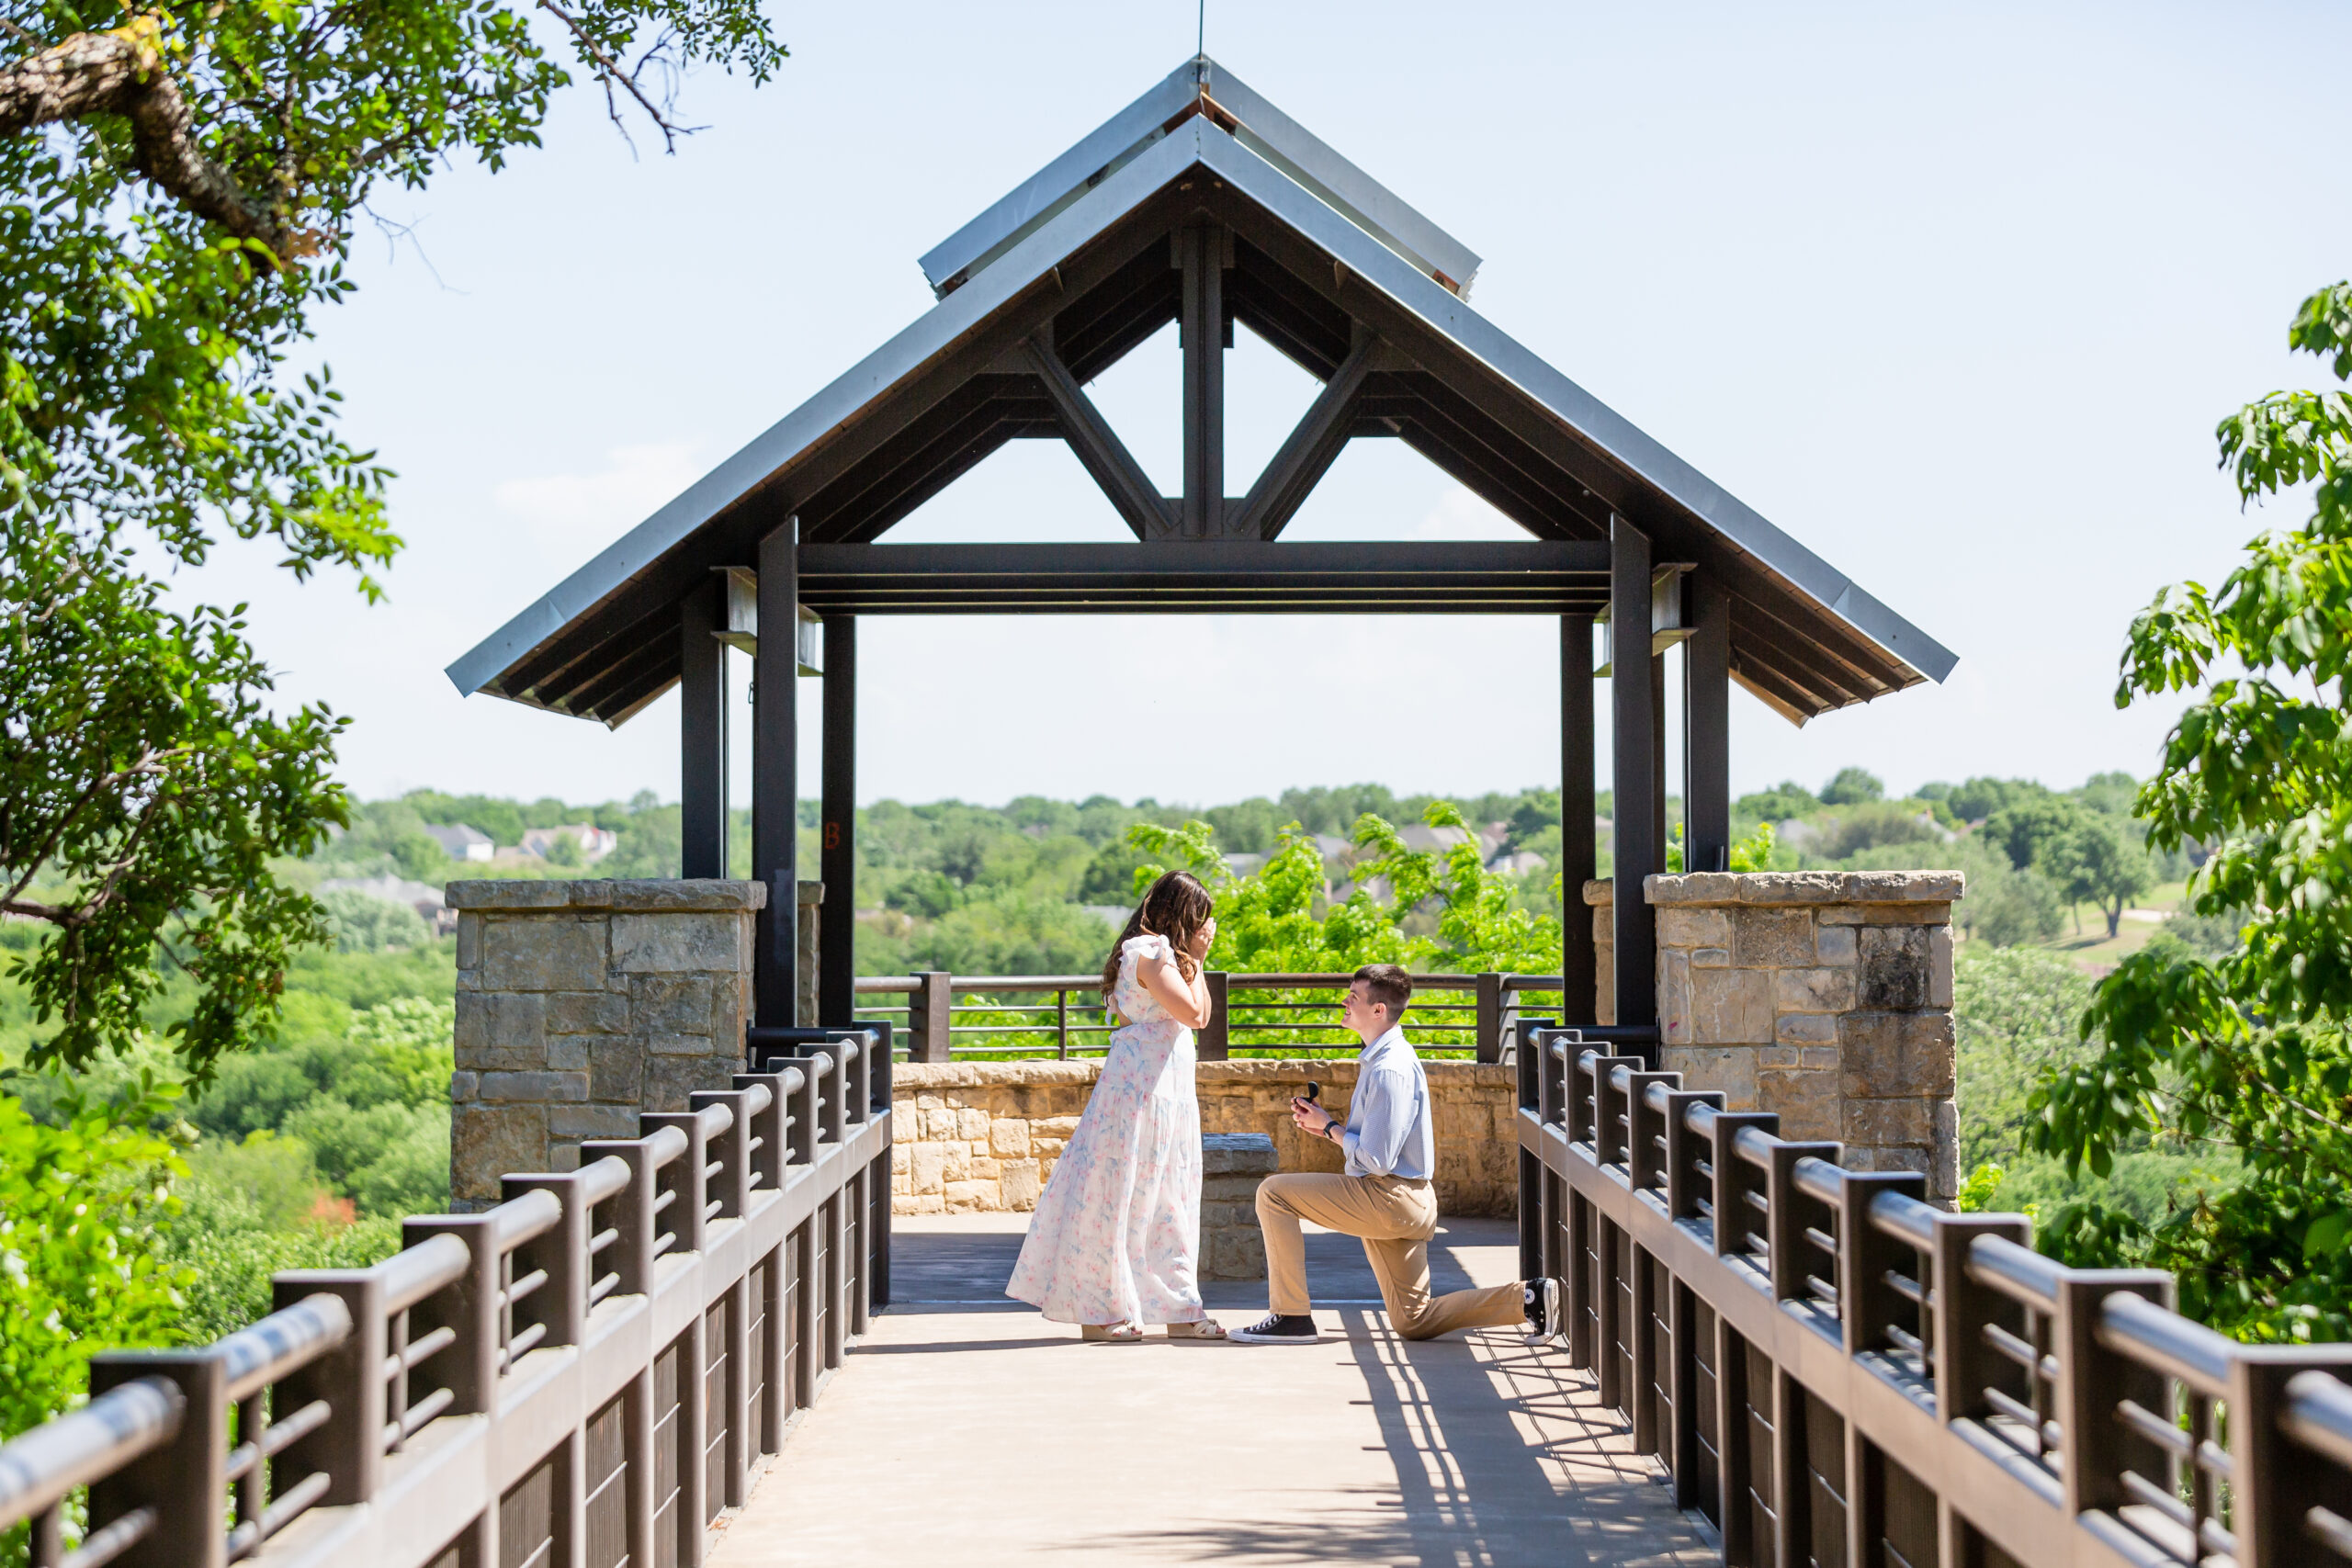 Dallas wedding photographers capture man down on one knee during Arbor Hills Nature Preserve proposal